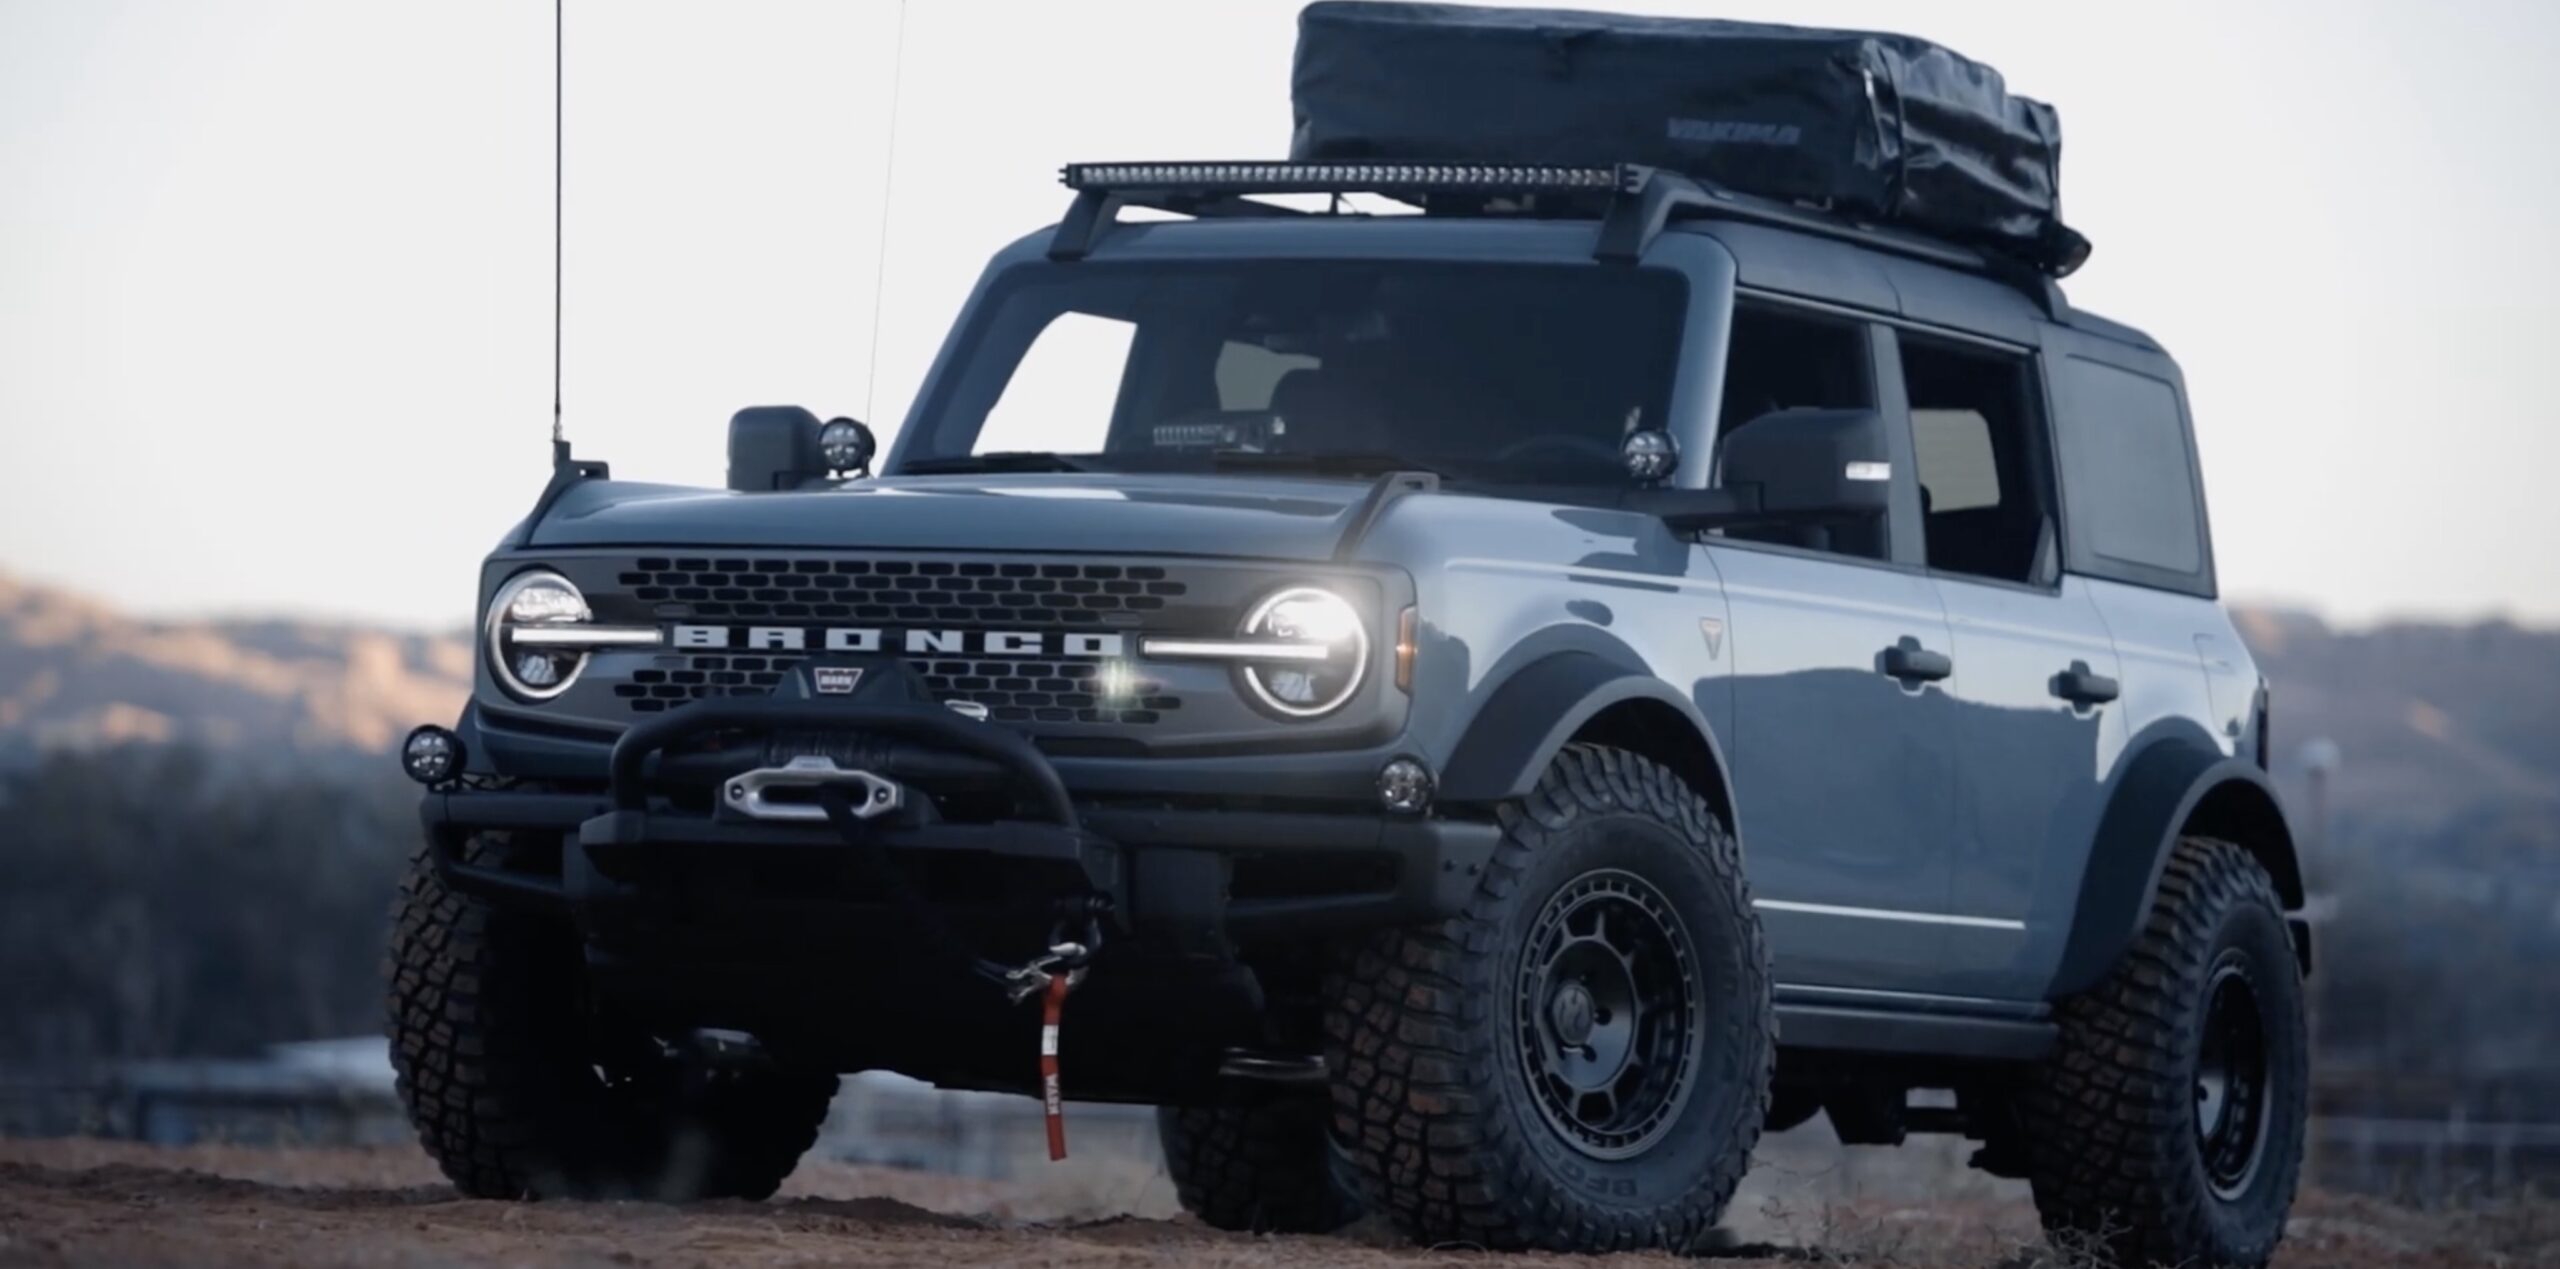 Hands On Walkaround Review of the Bronco Overland Badlands With